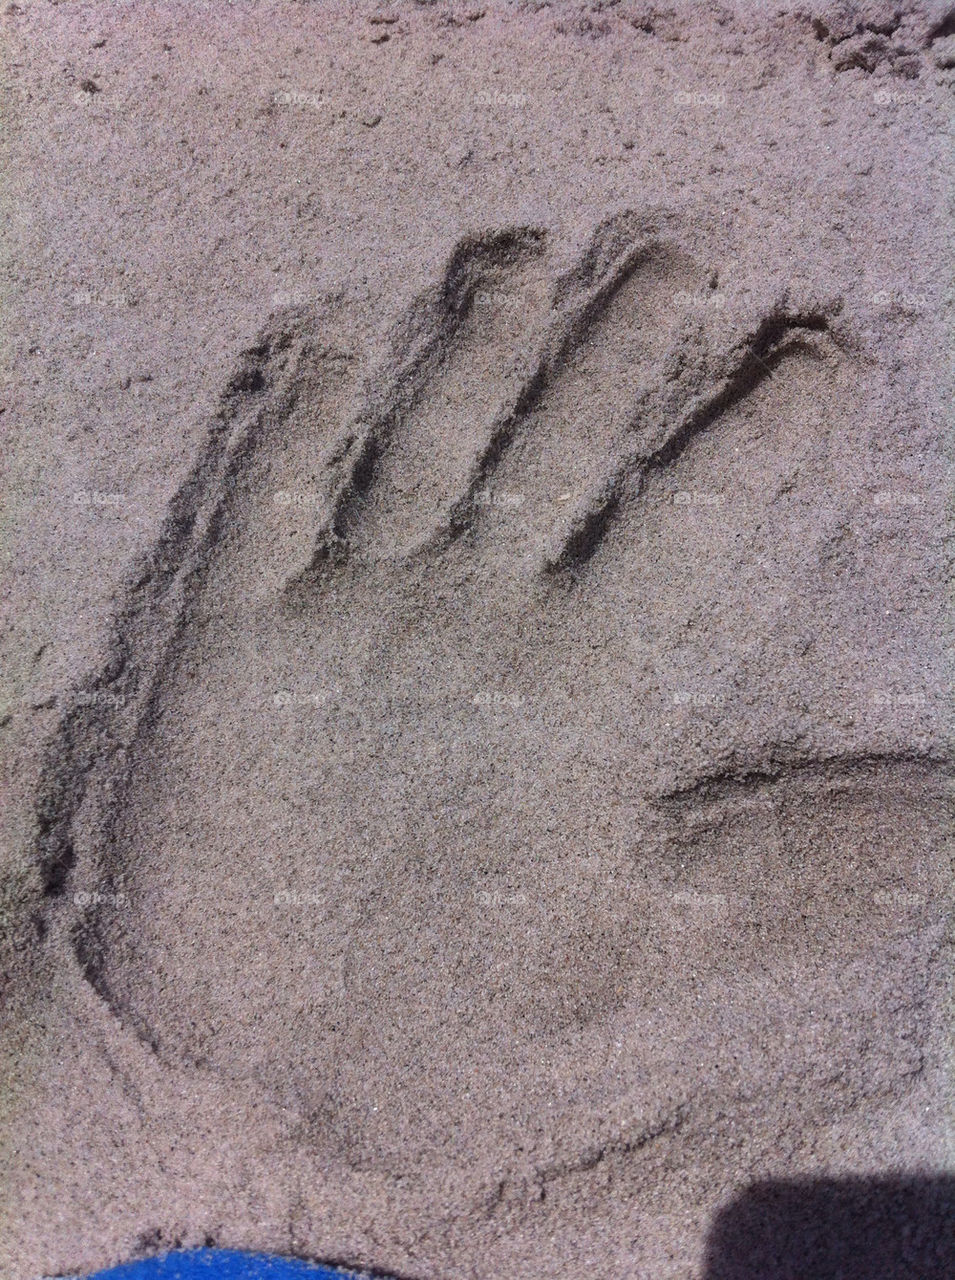 HAND PRINT IN THE SAND